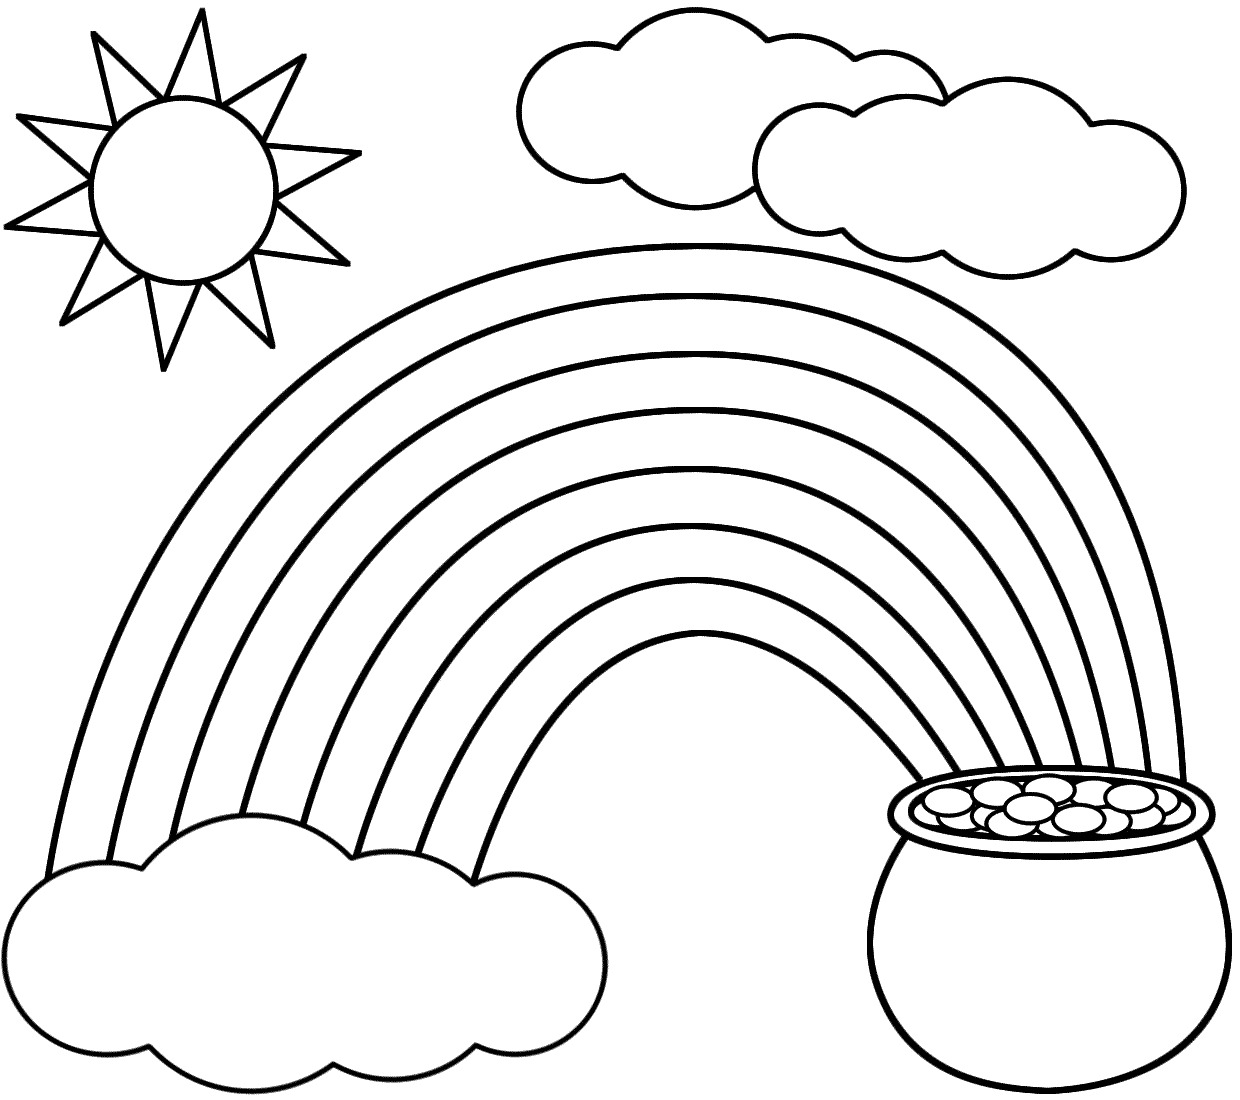 Pix For > Spring Rainbow Coloring Page